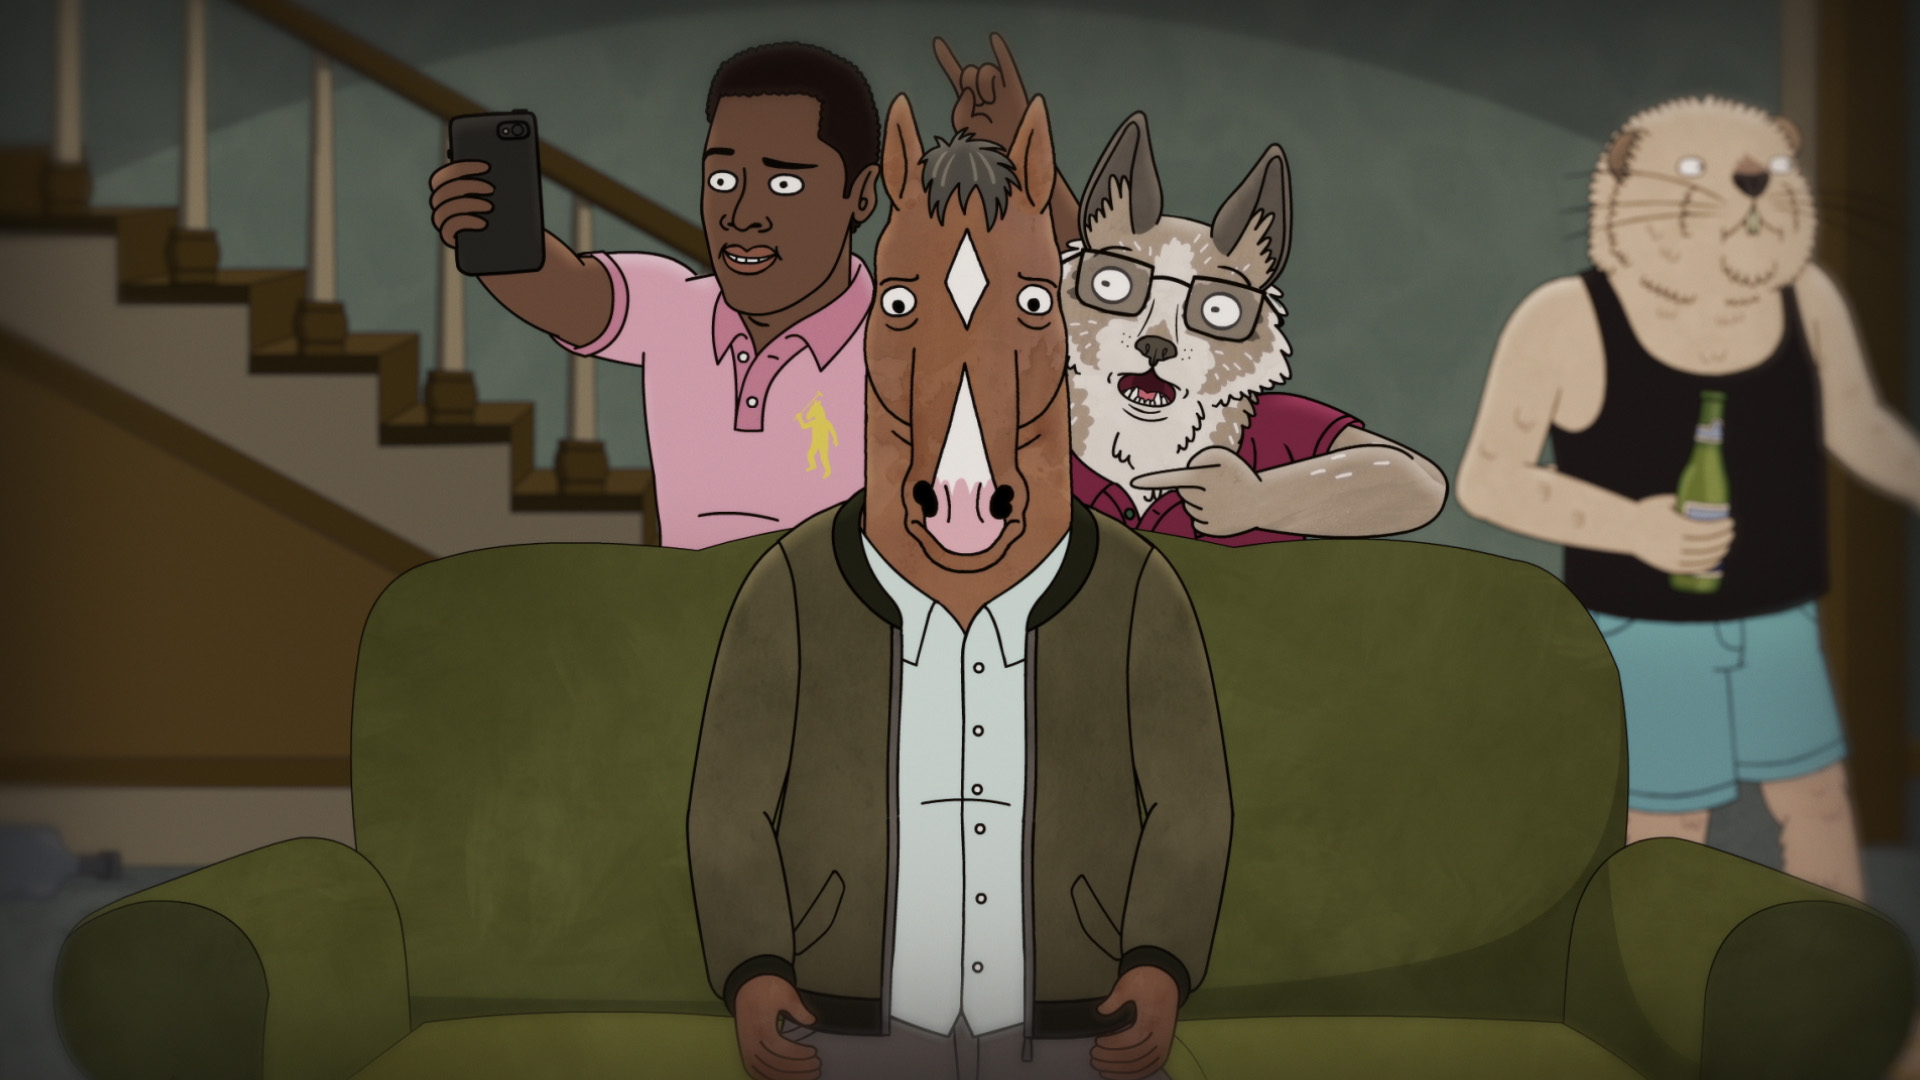 BoJack Horseman, an anthropomorphic horse, sits on a green couch while a human takes a selfie with him and an anthropomorphic dog in glasses freaks out.